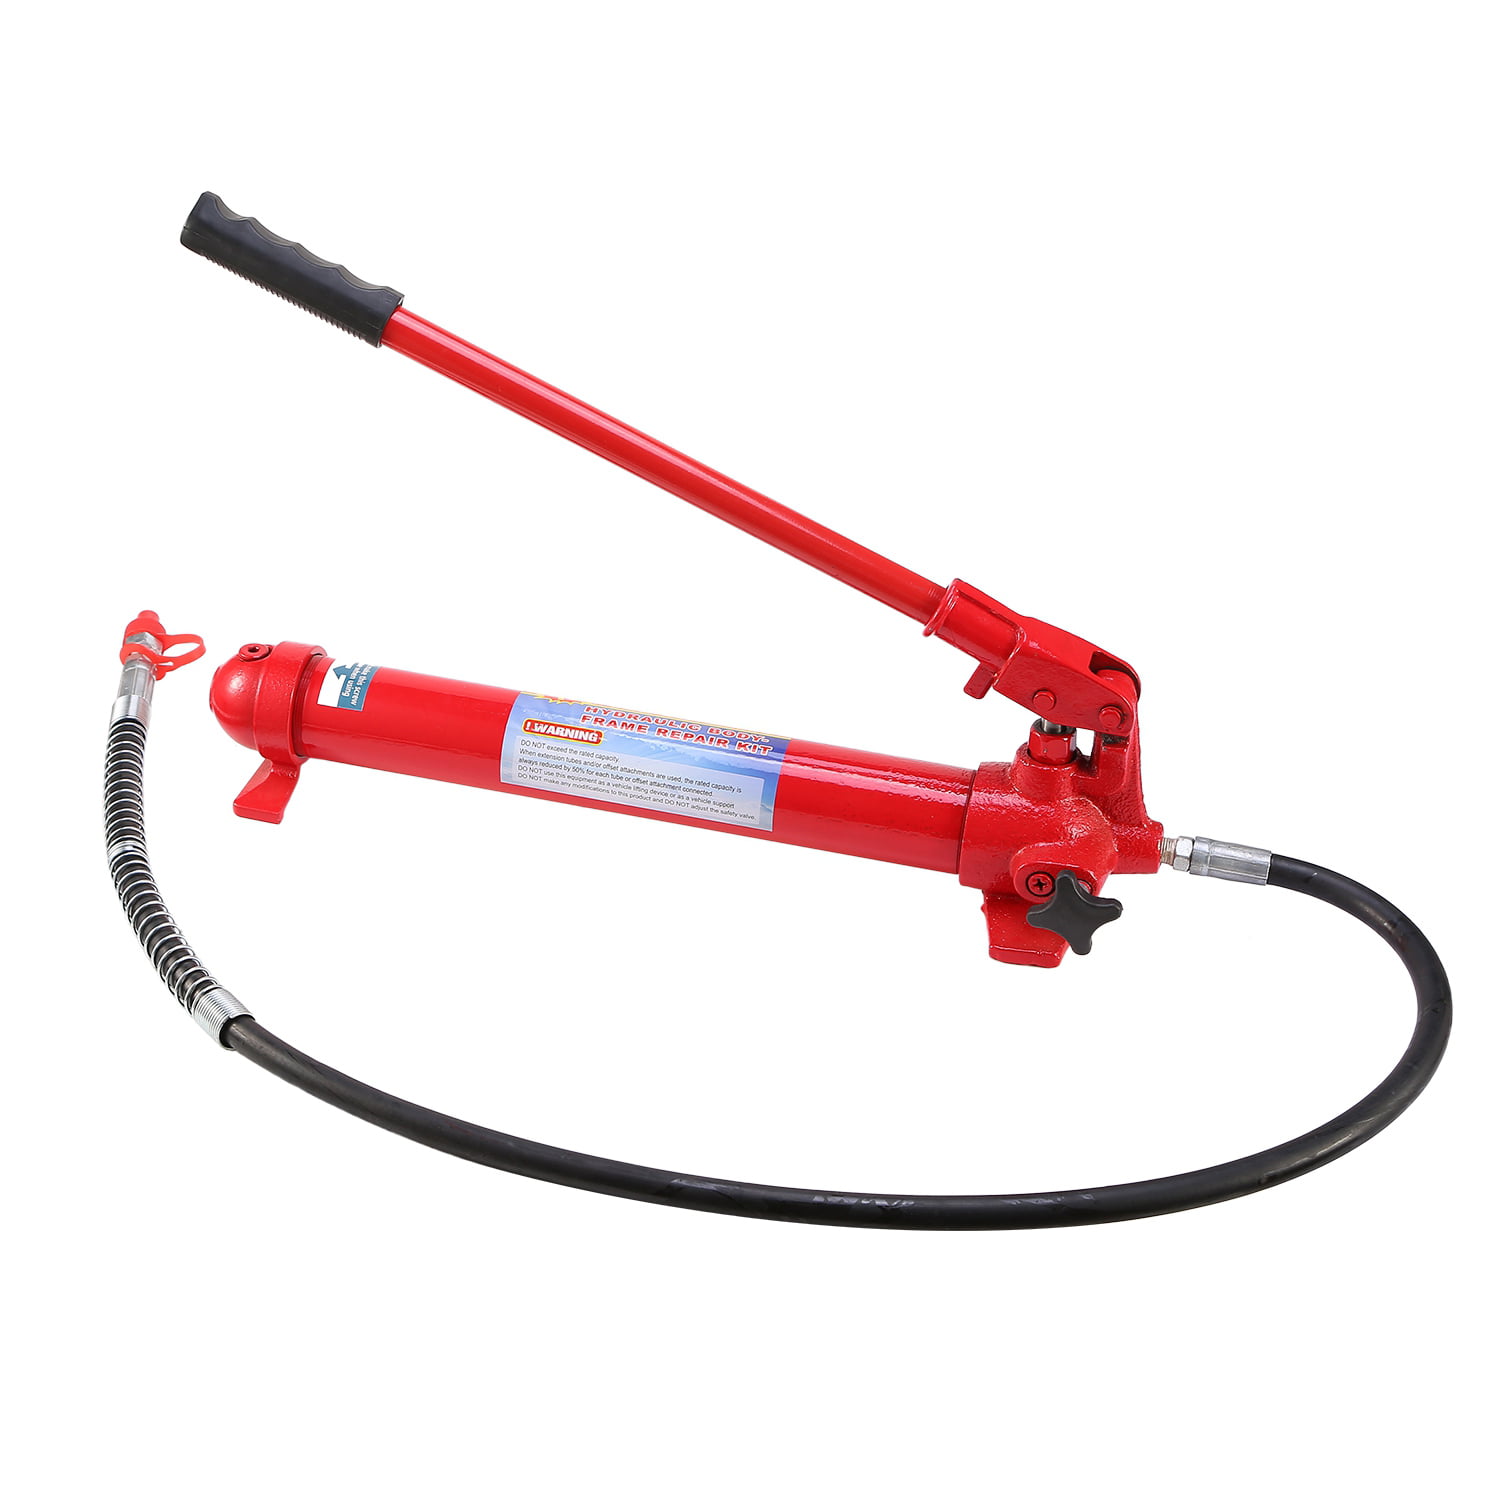 10 Ton Hydraulic Jack Hand Pump Ram Replacement for Body Frame Shop Repair Tool 